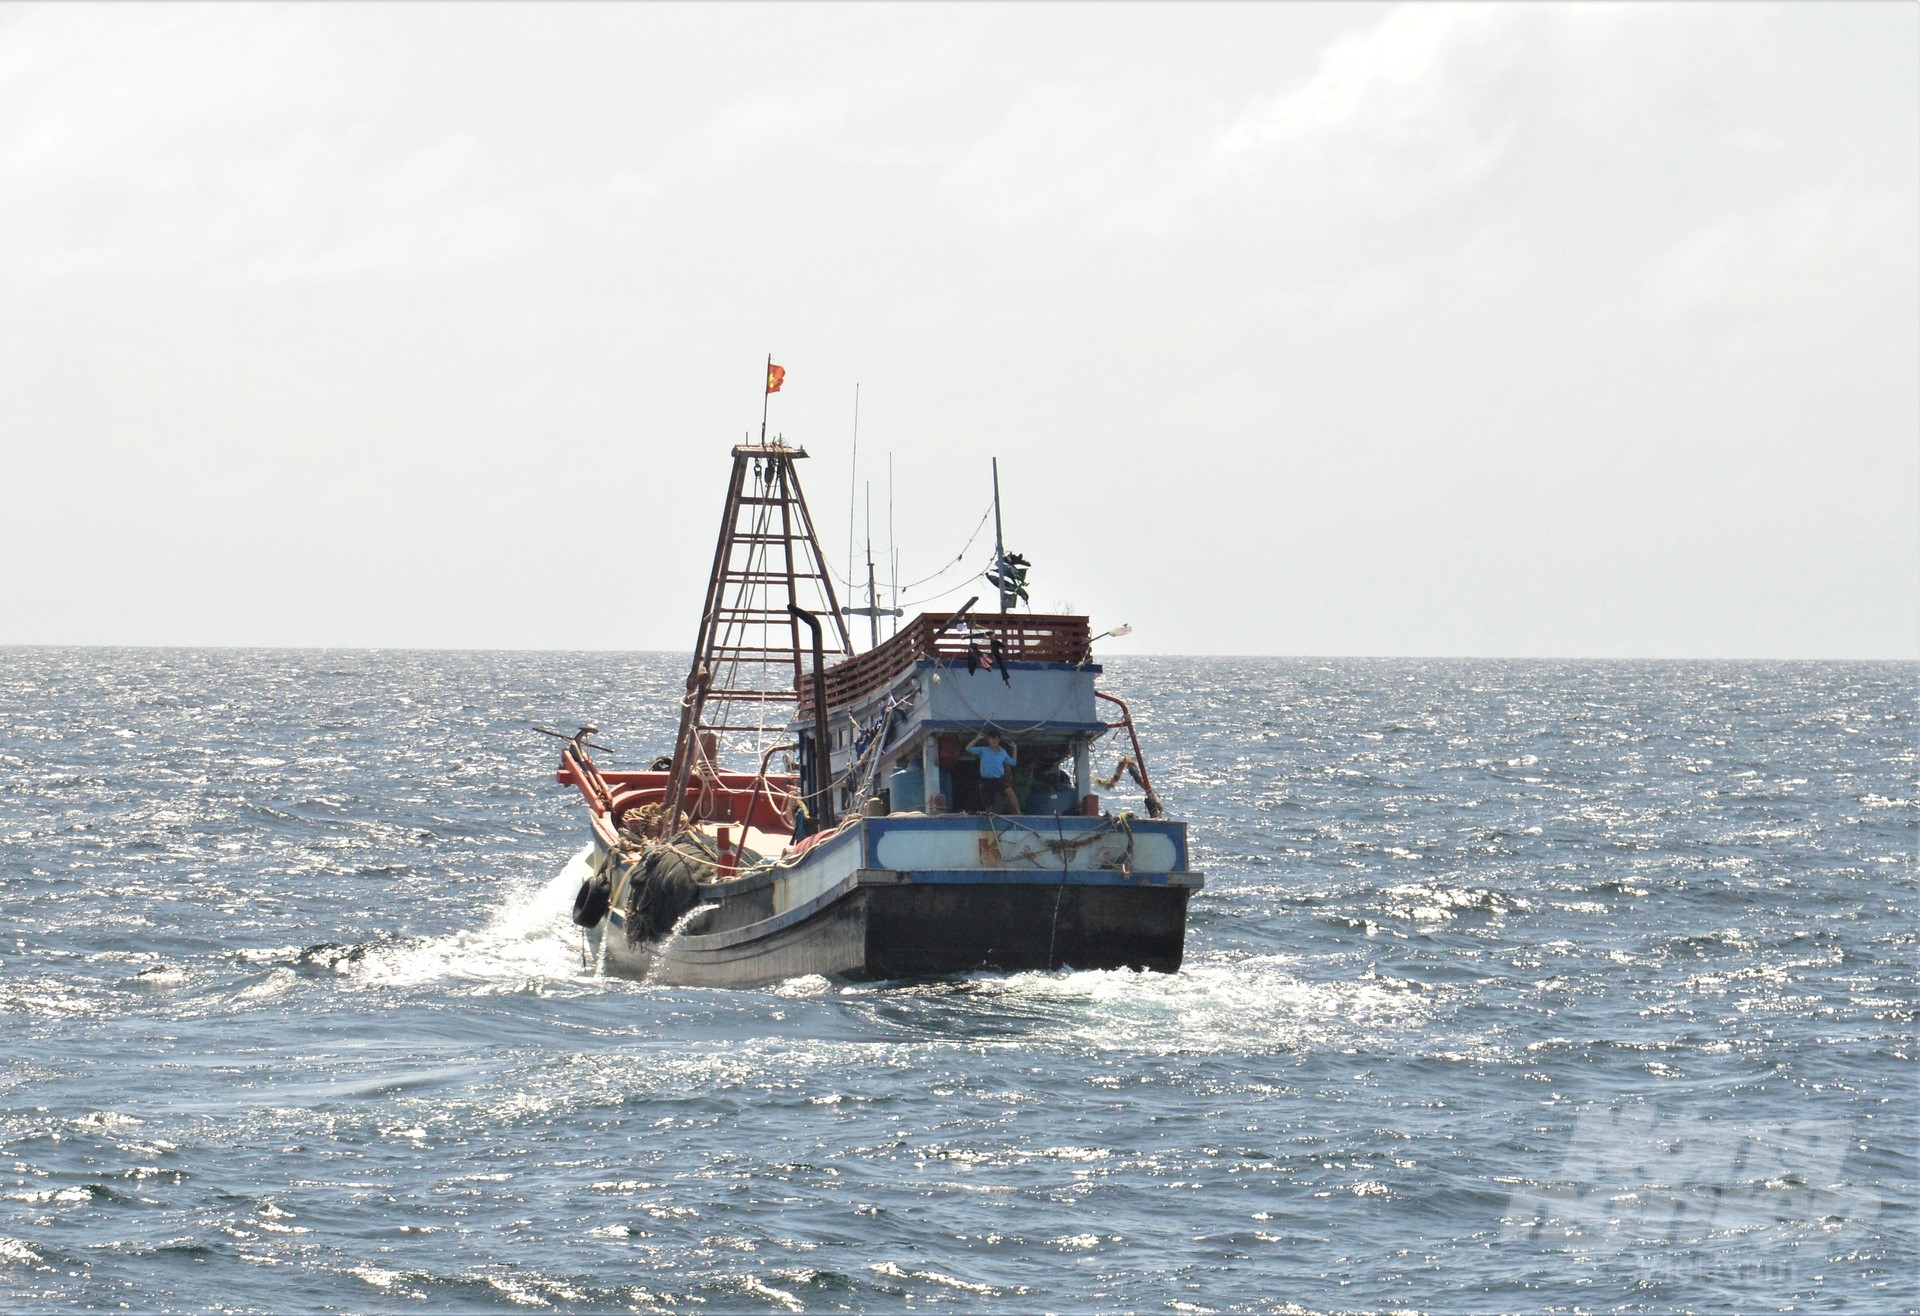 The fishing vessels belonging to the category of 'missing' in Kien Giang province are classified as a group of fishing vessels with a high risk of violating regulations on illegal fishing because they are not under the management of the functional sector. Photo: Trung Chanh.